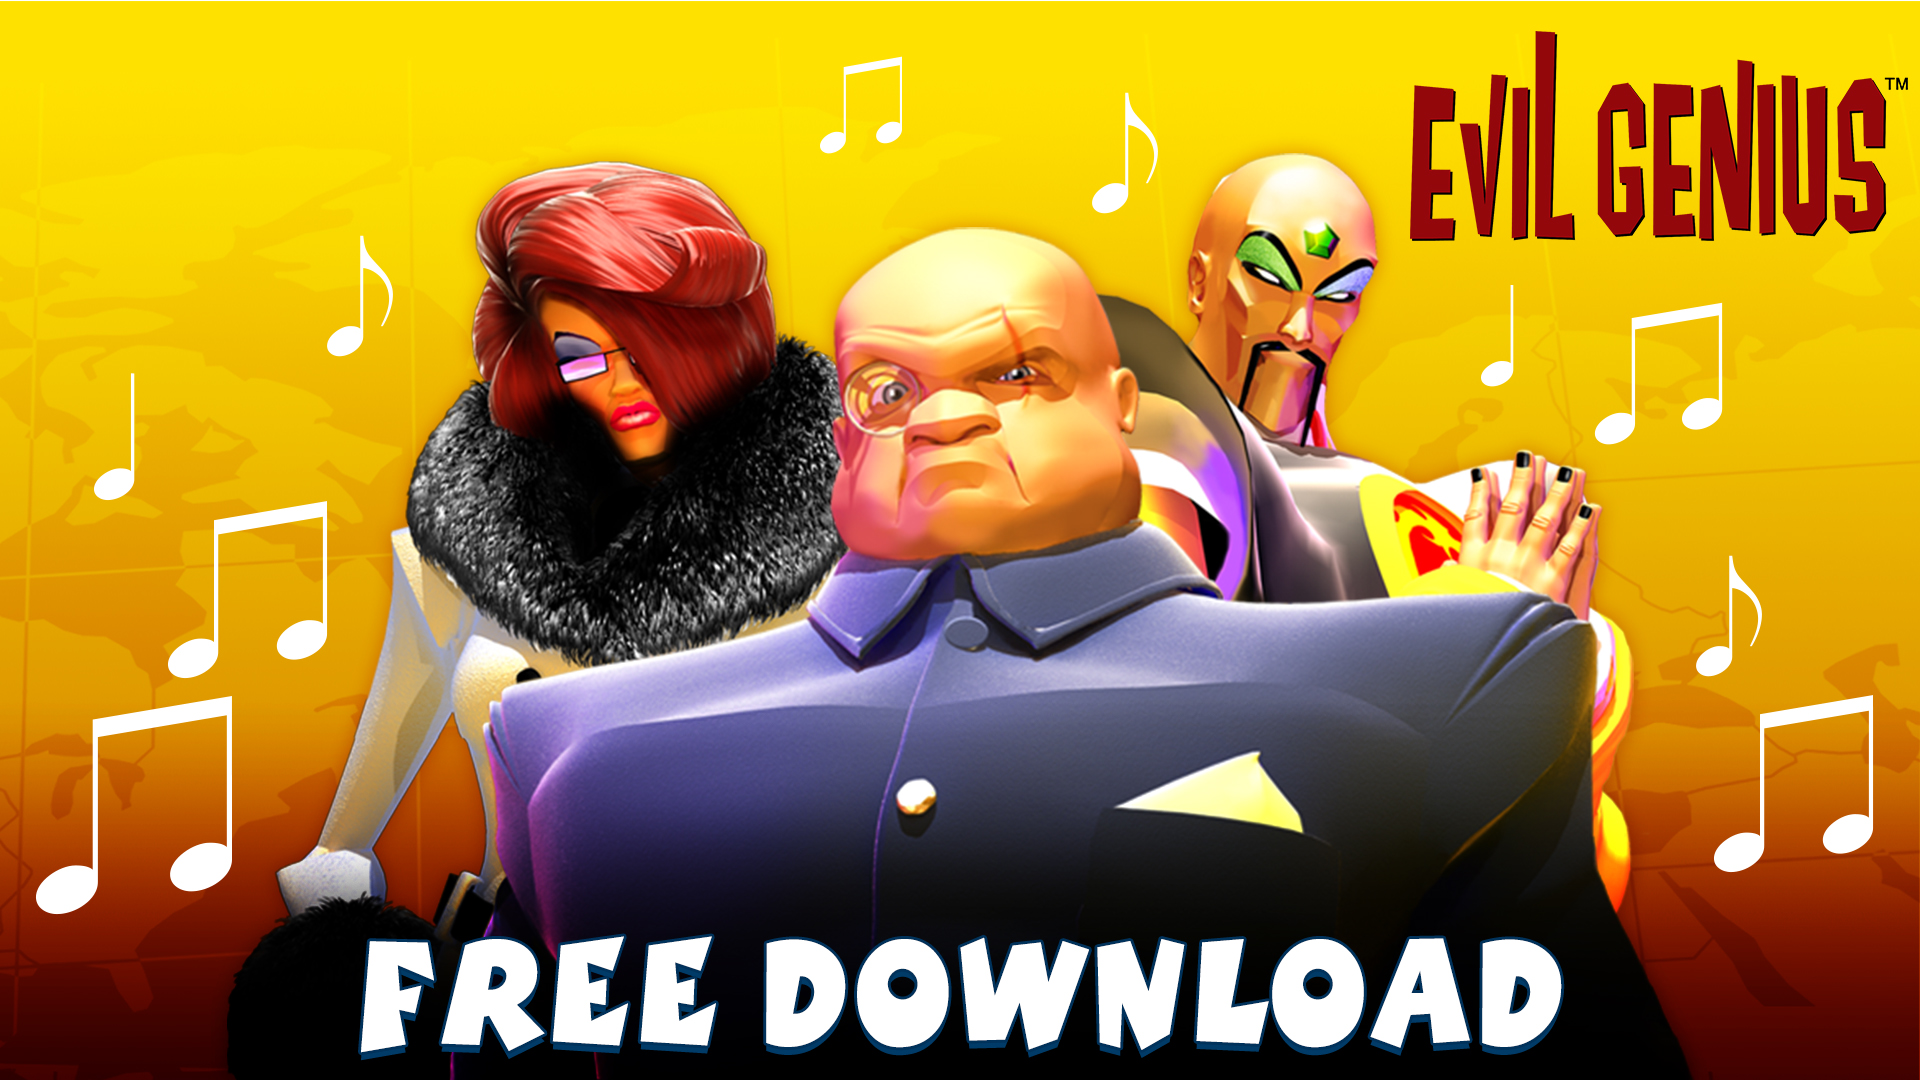 Get The Evil Genius Soundtrack For Free